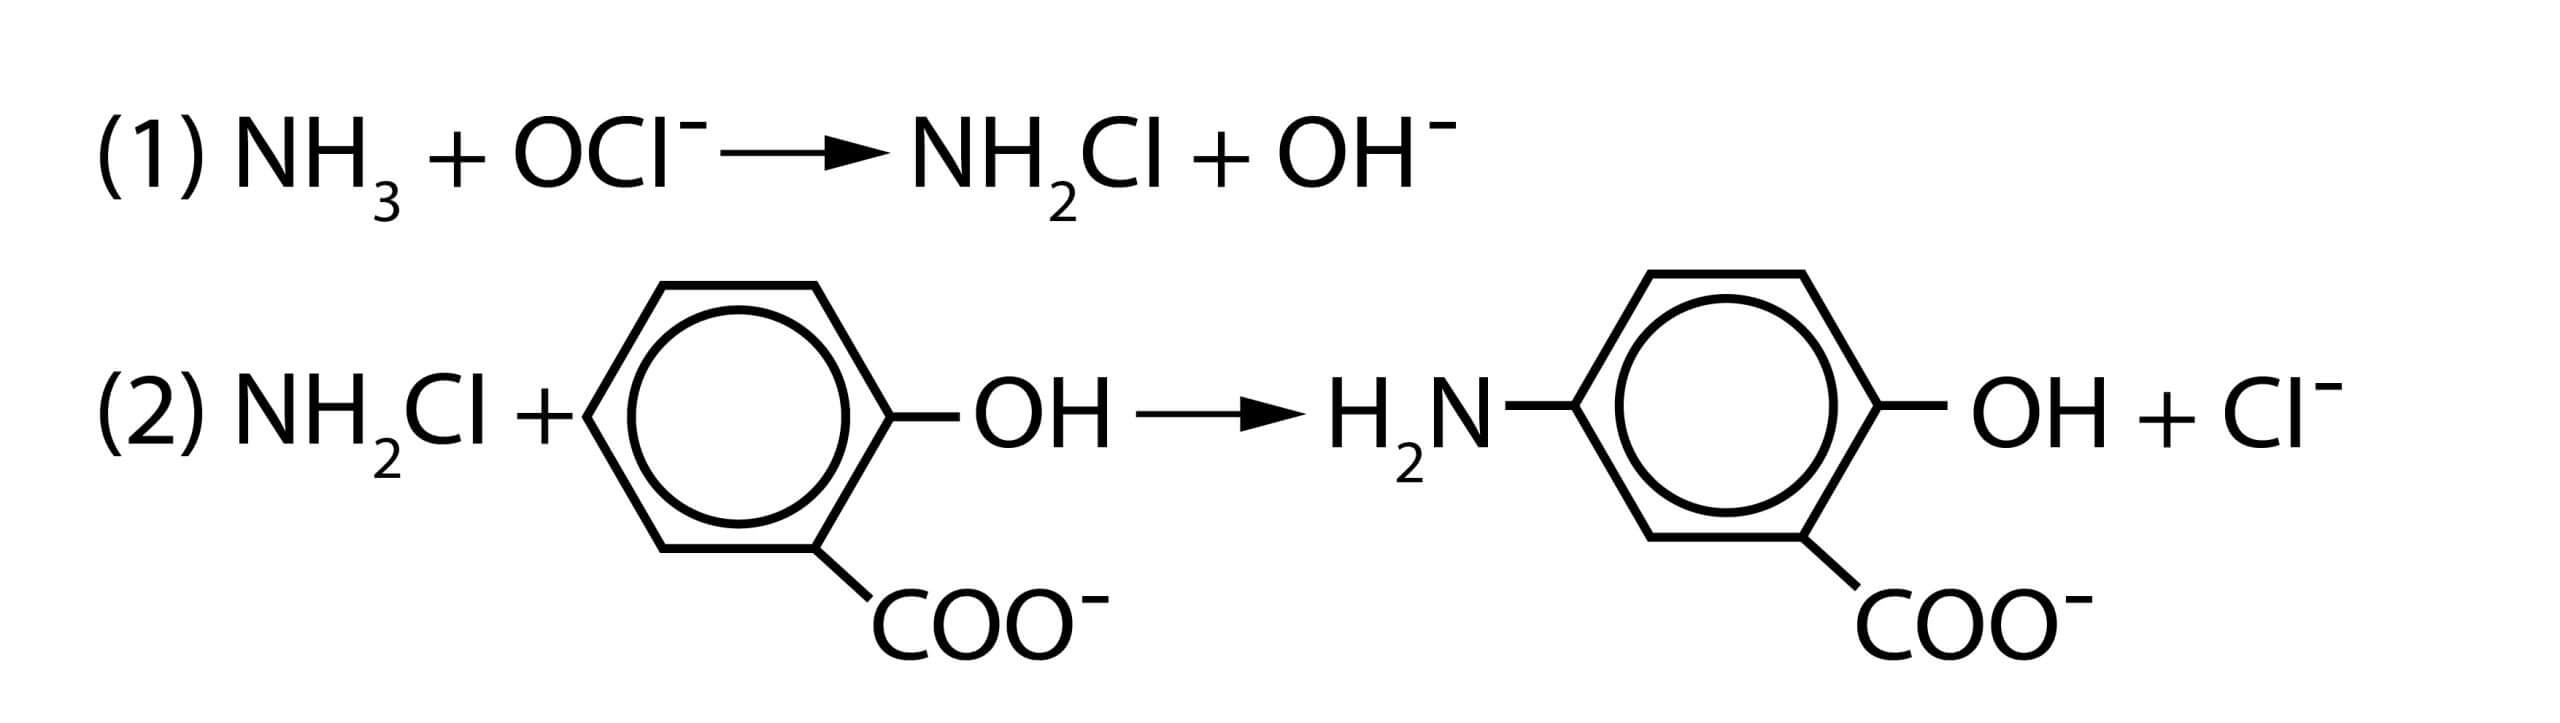 Salicylate method, Ammonia compounds are initially combined with hypochlorite to form monochloramine, which then reacts with salicylate to form 5-aminosalicylate